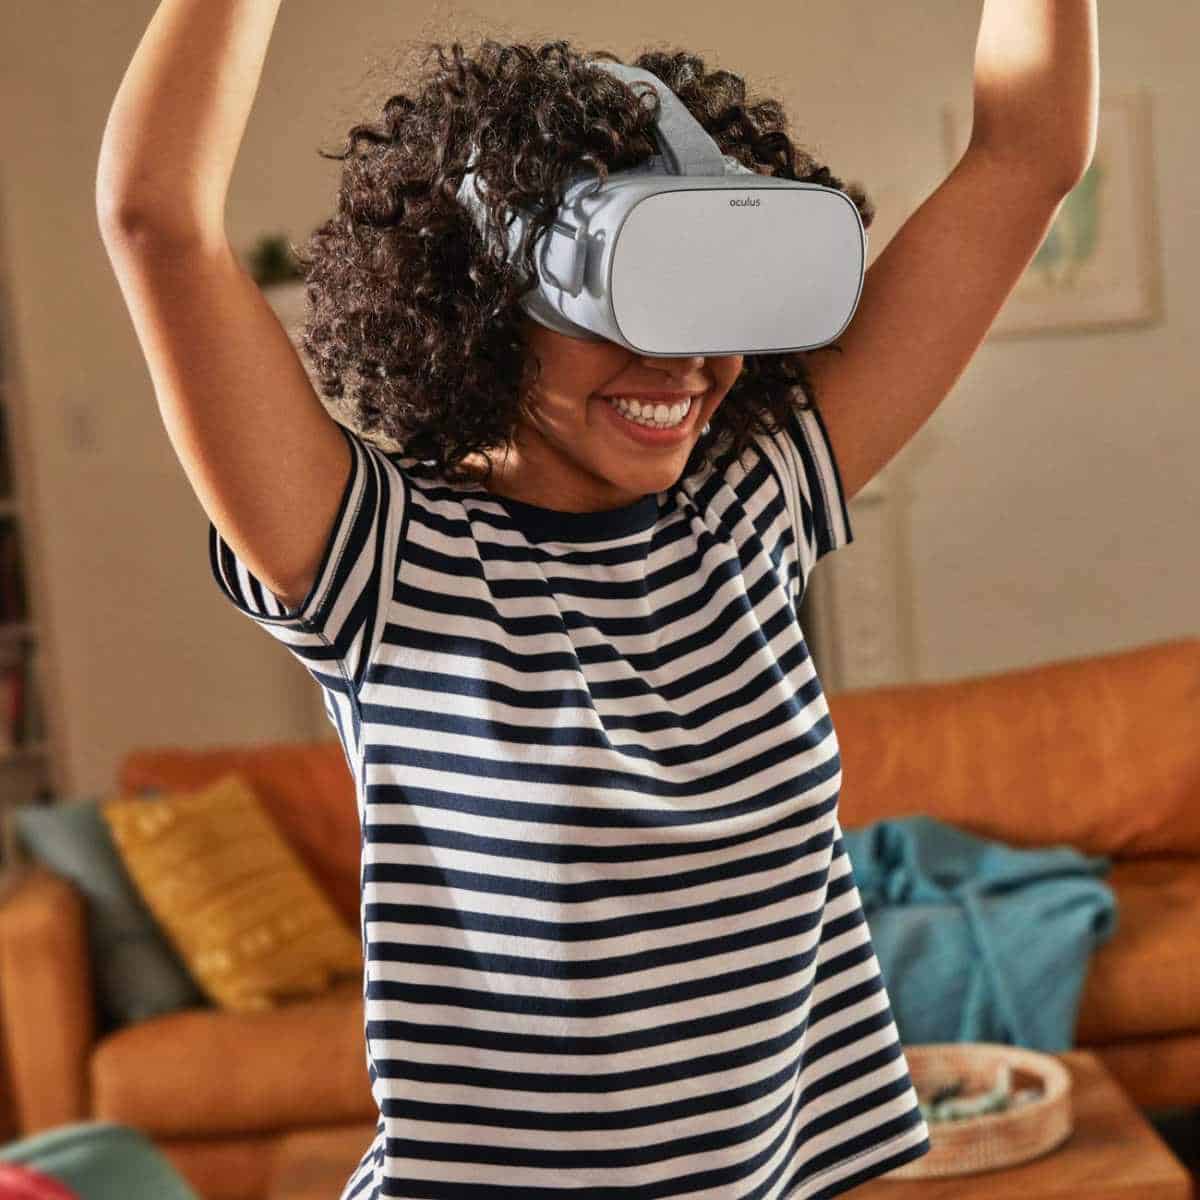 Oculus Go Standalone Virtual Reality Headset | Unique Wearable Technology Gadgets